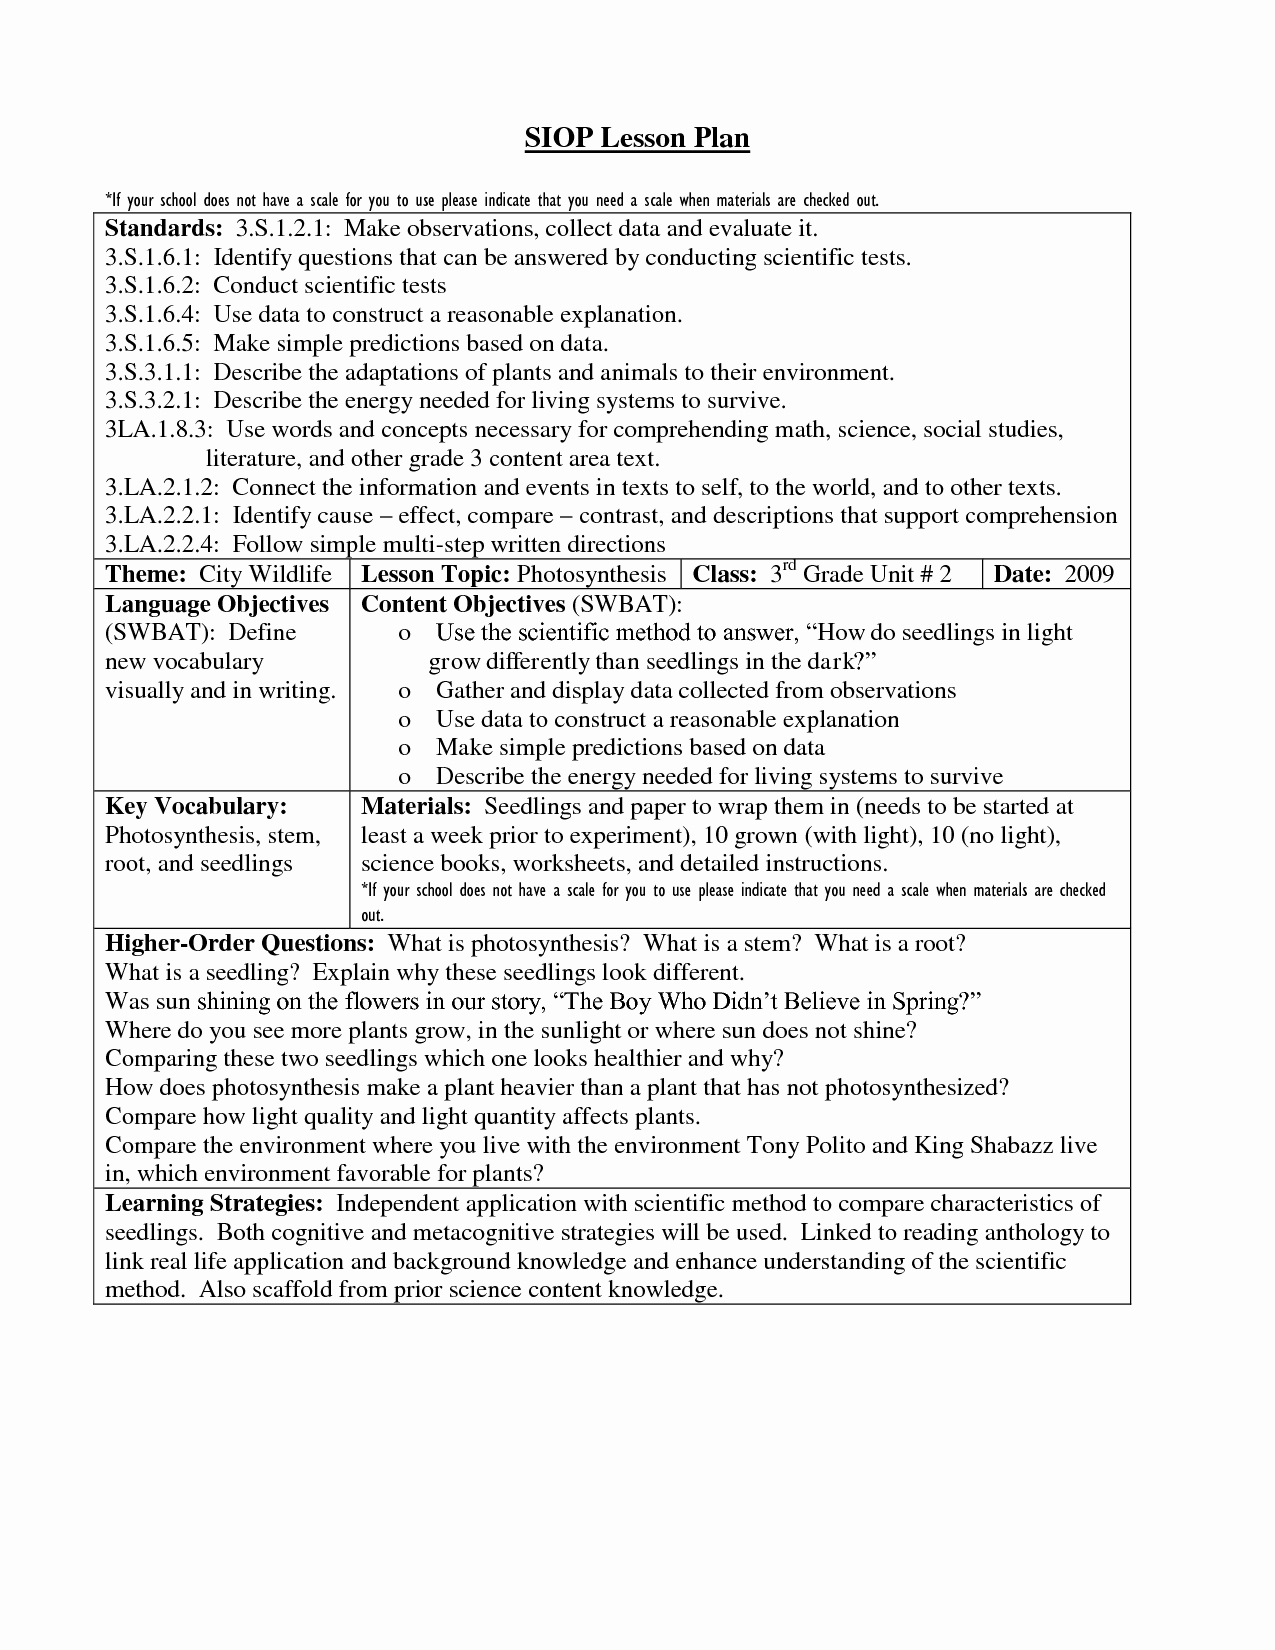 Siop Lesson Plan Templates Luxury 16 Awesome Siop Lesson Plan Template 2 Example